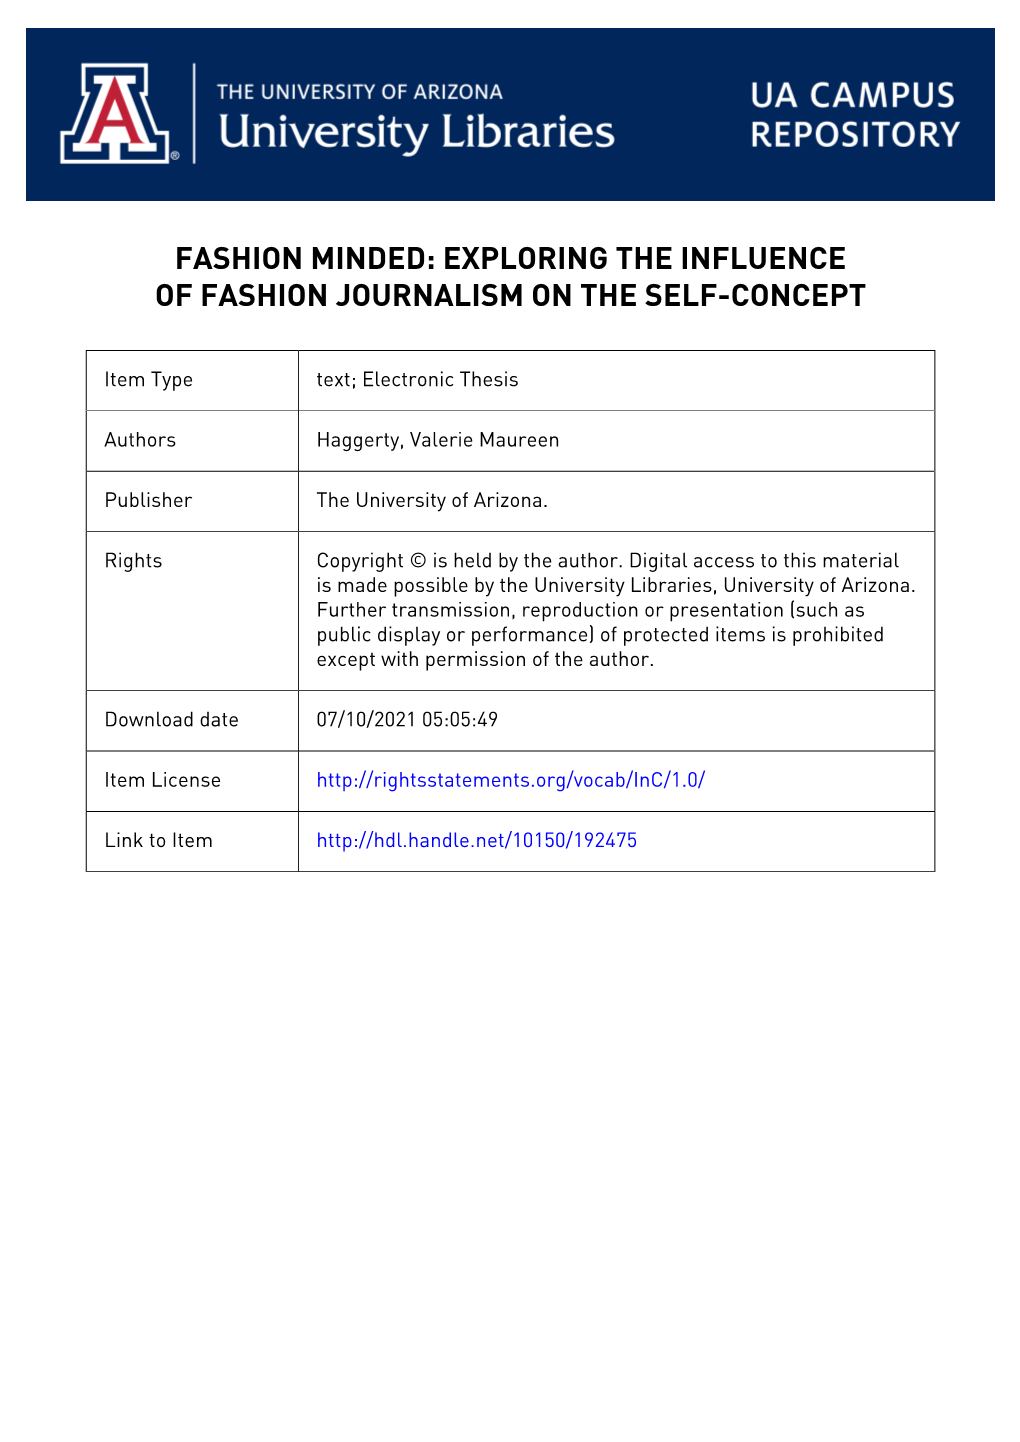 Exploring the Influence of Fashion Journalism on the Self Concept